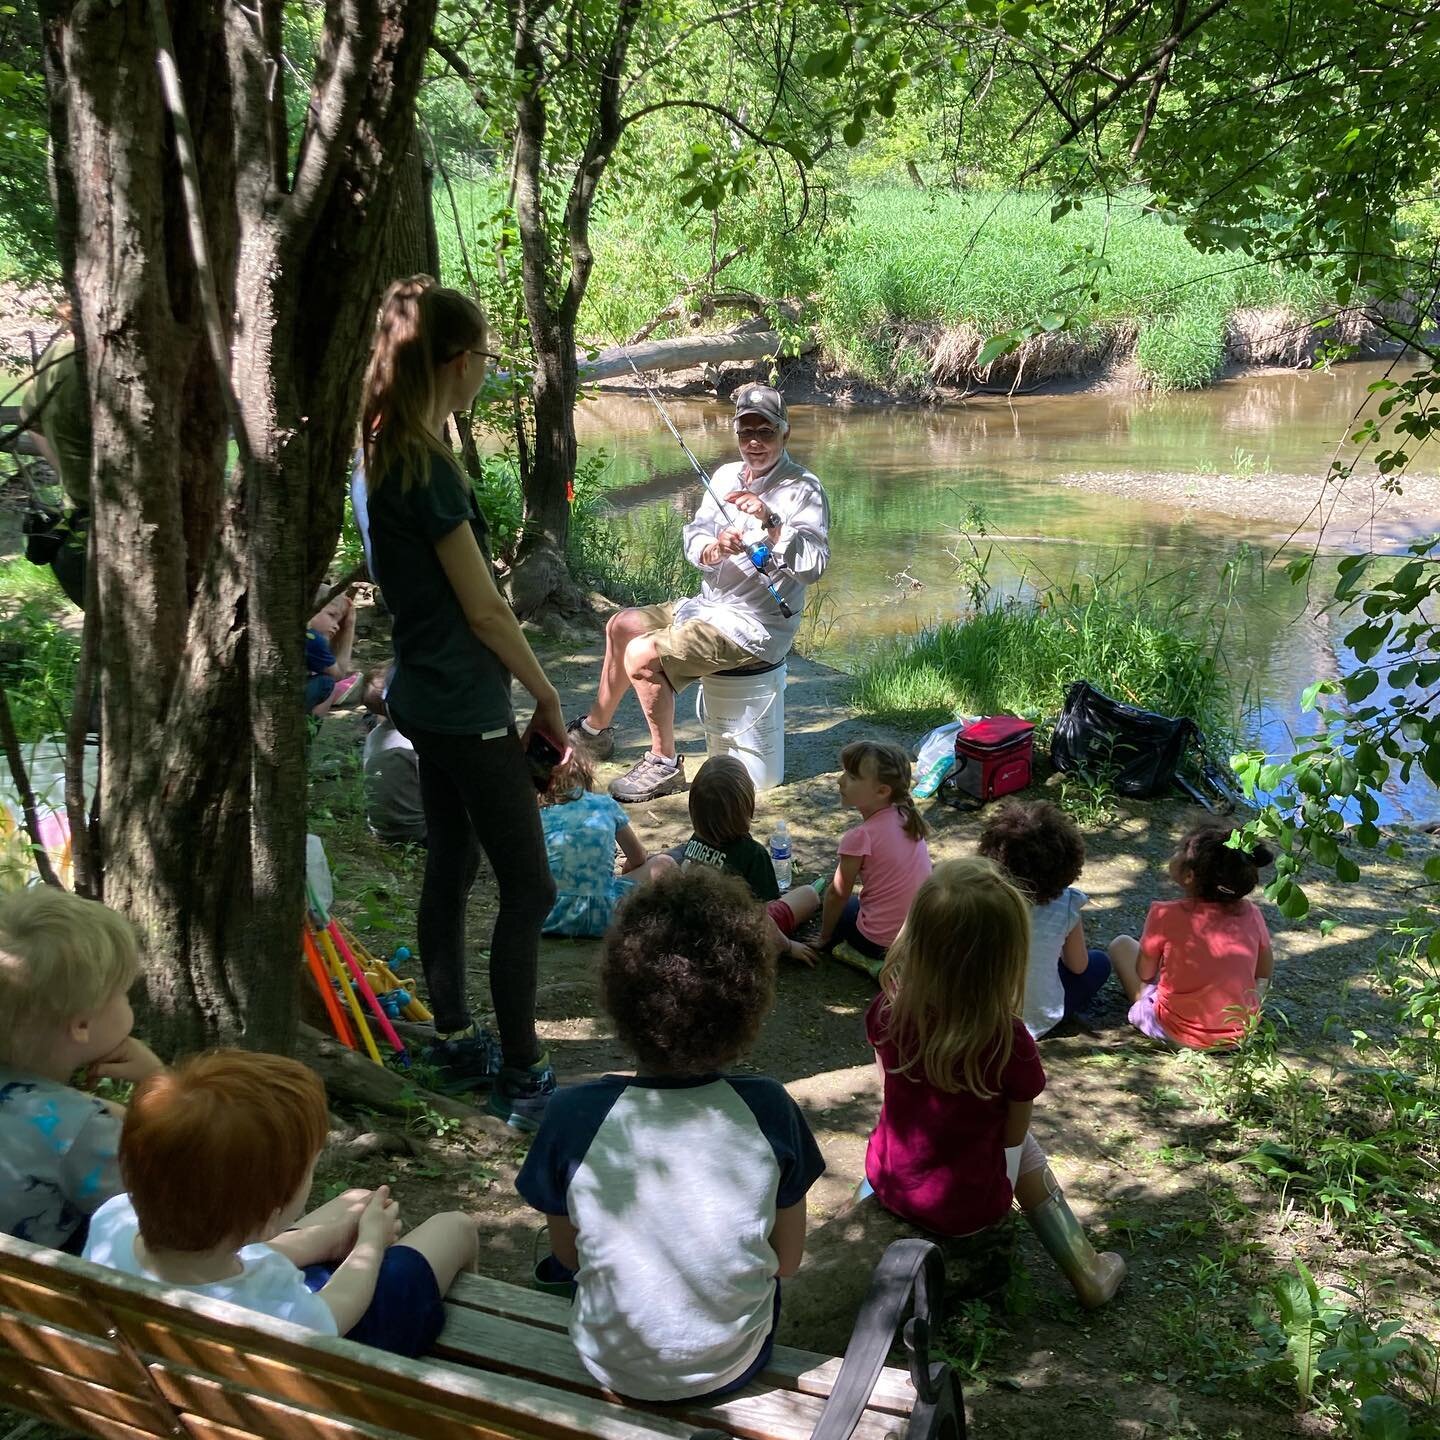 4K had the best day fishing by the river today! One of our classmates&rsquo;s grandpa Mr. John came and taught us all about different bait, the parts of a fishing pole, and how to cast! We had so much fun practicing and wading into the river. Thank y